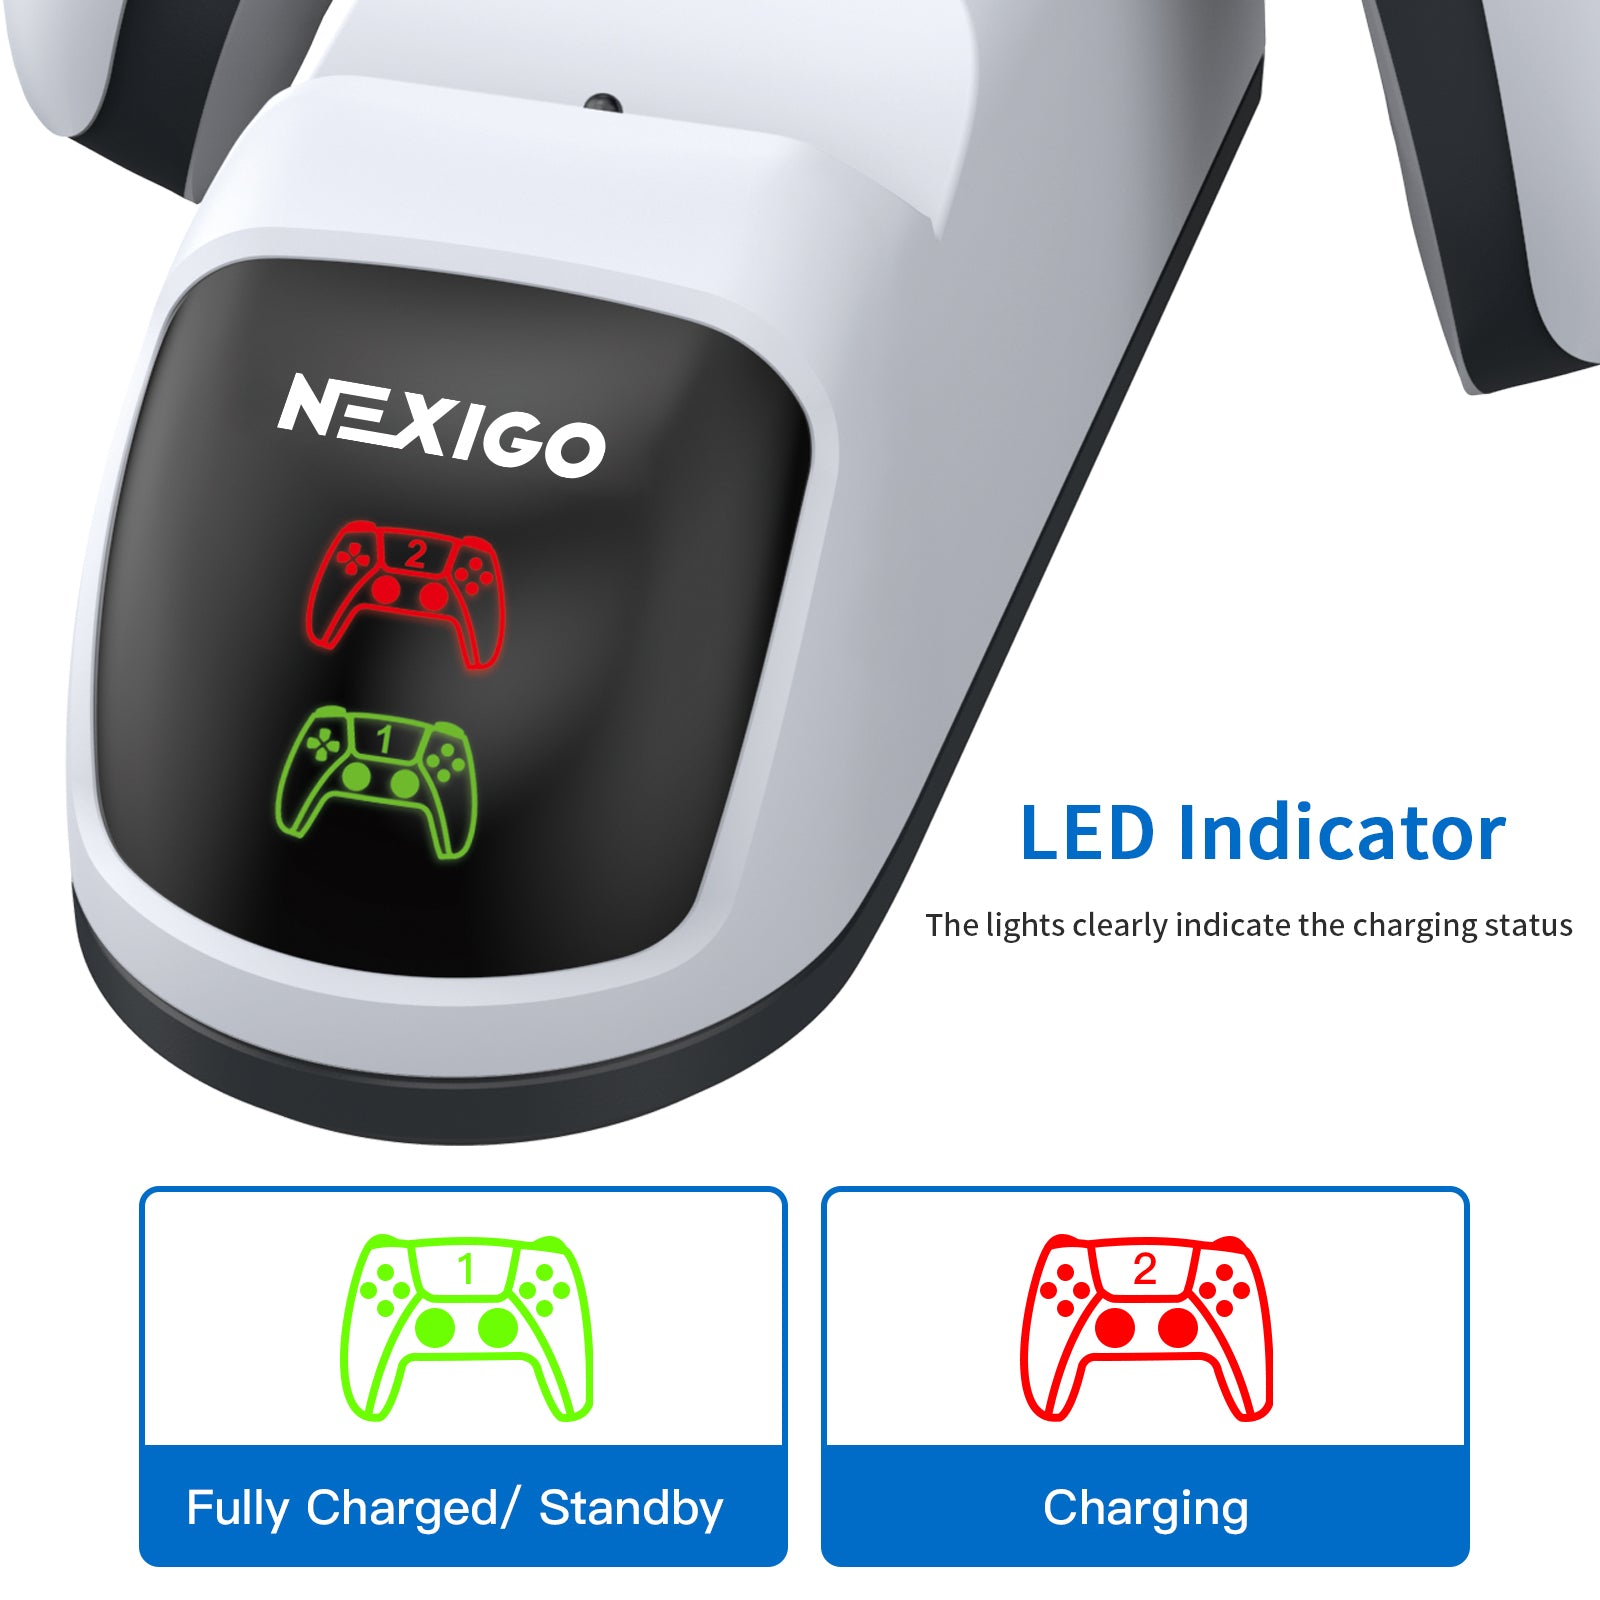 Clear LED indicators for charging status: Red for charging, green for fully charged.